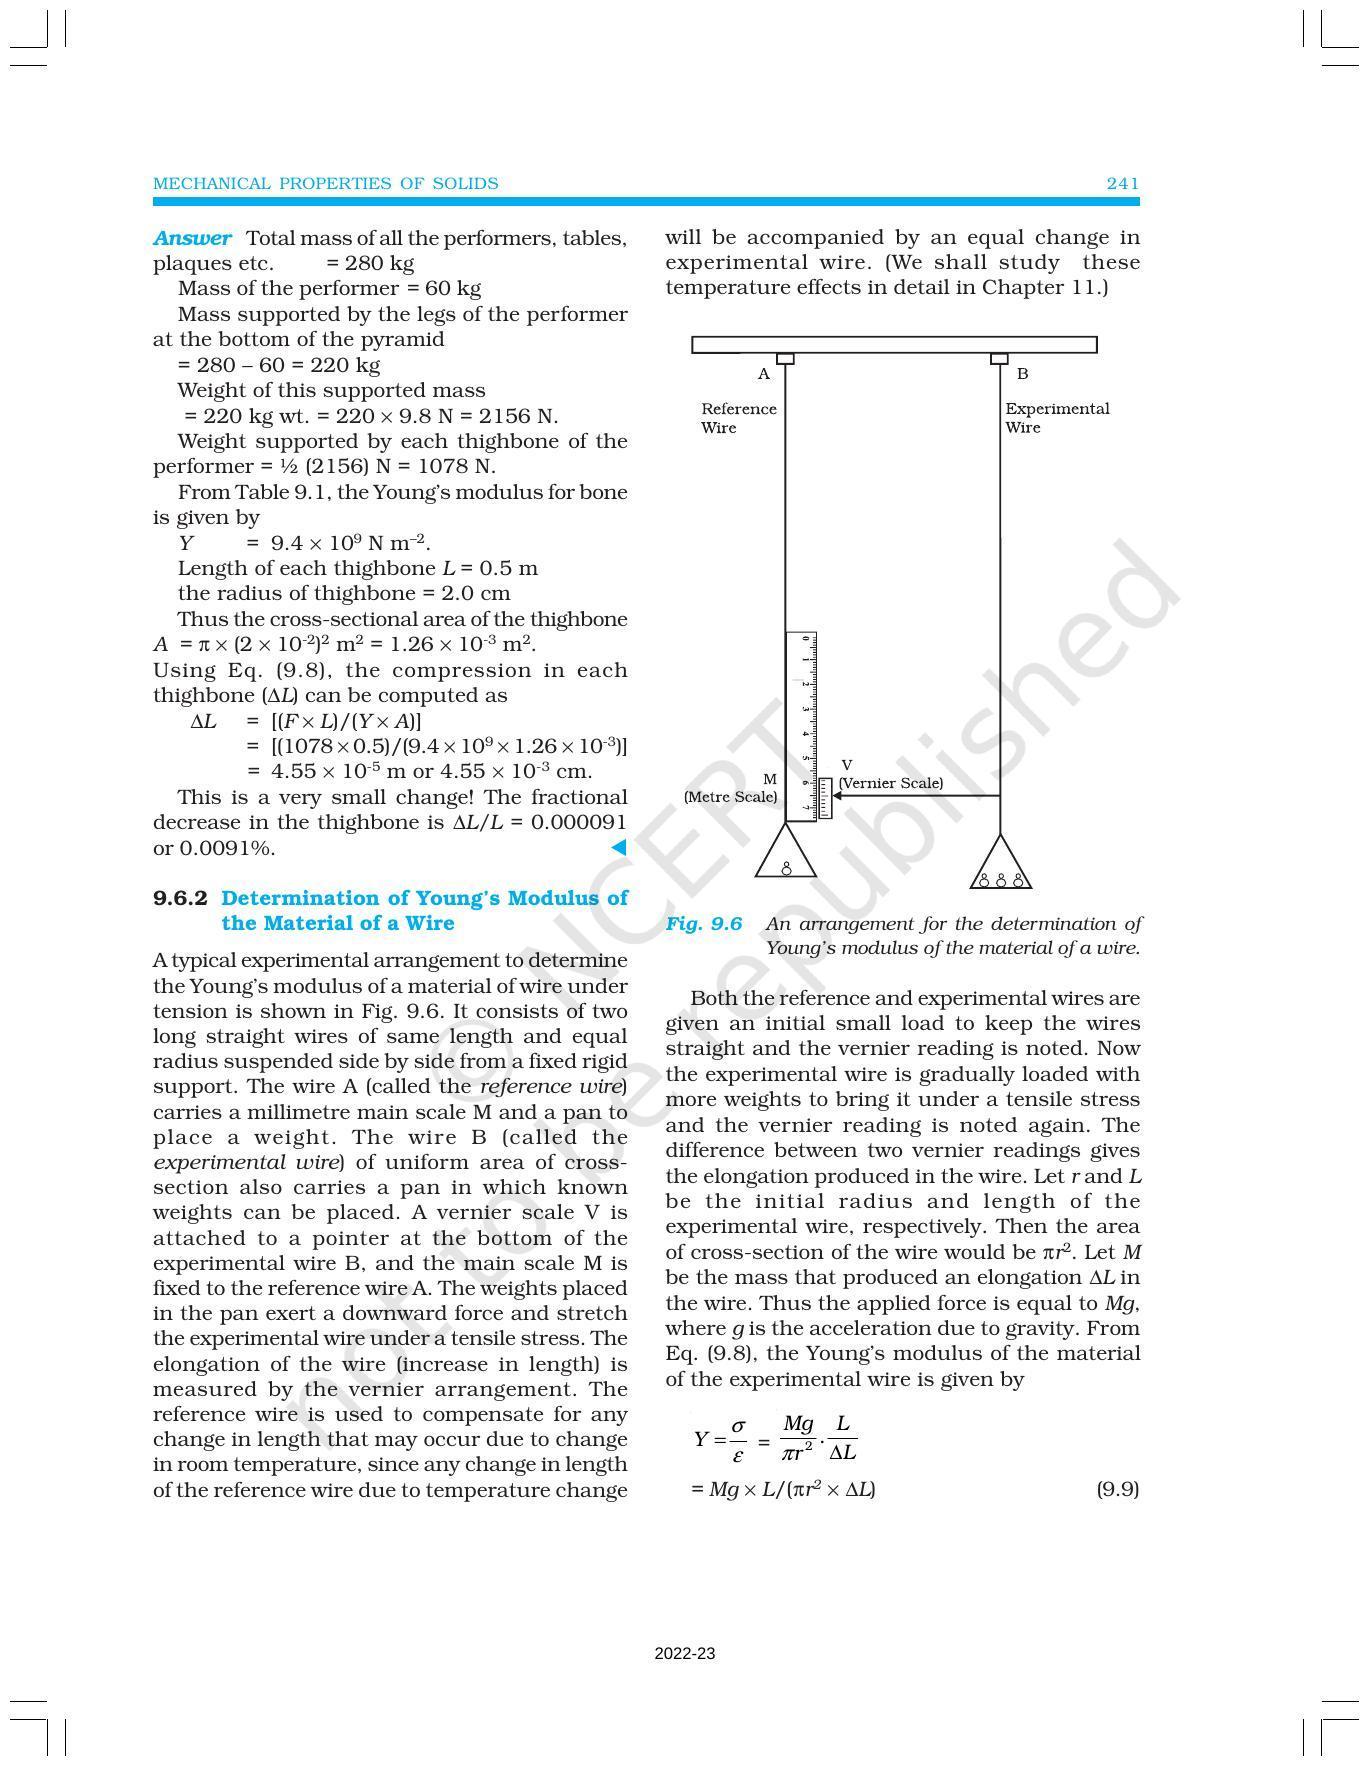 NCERT Book for Class 11 Physics Chapter 9 Mechanical Properties of Solids - Page 7